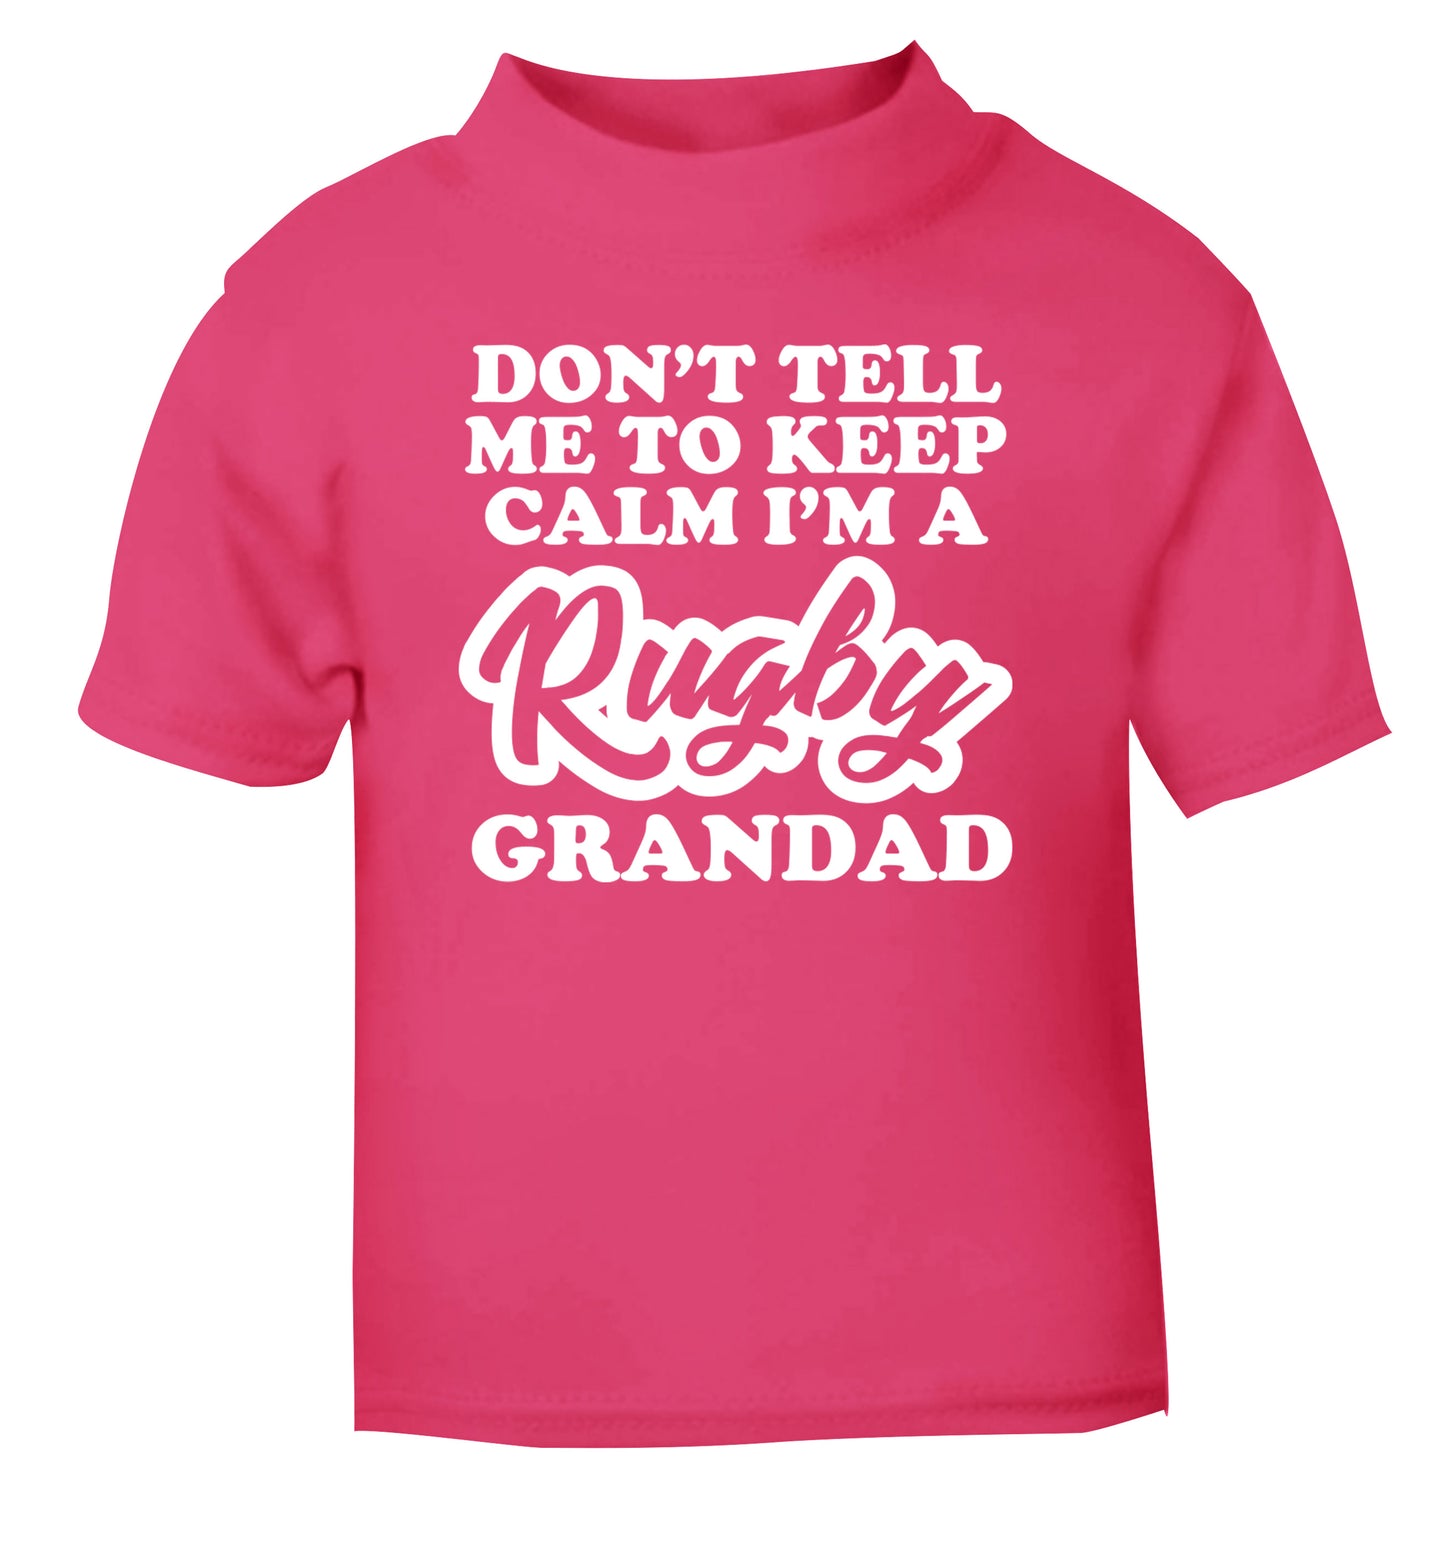 Don't tell me to keep calm I'm a rugby dad pink Baby Toddler Tshirt 2 Years